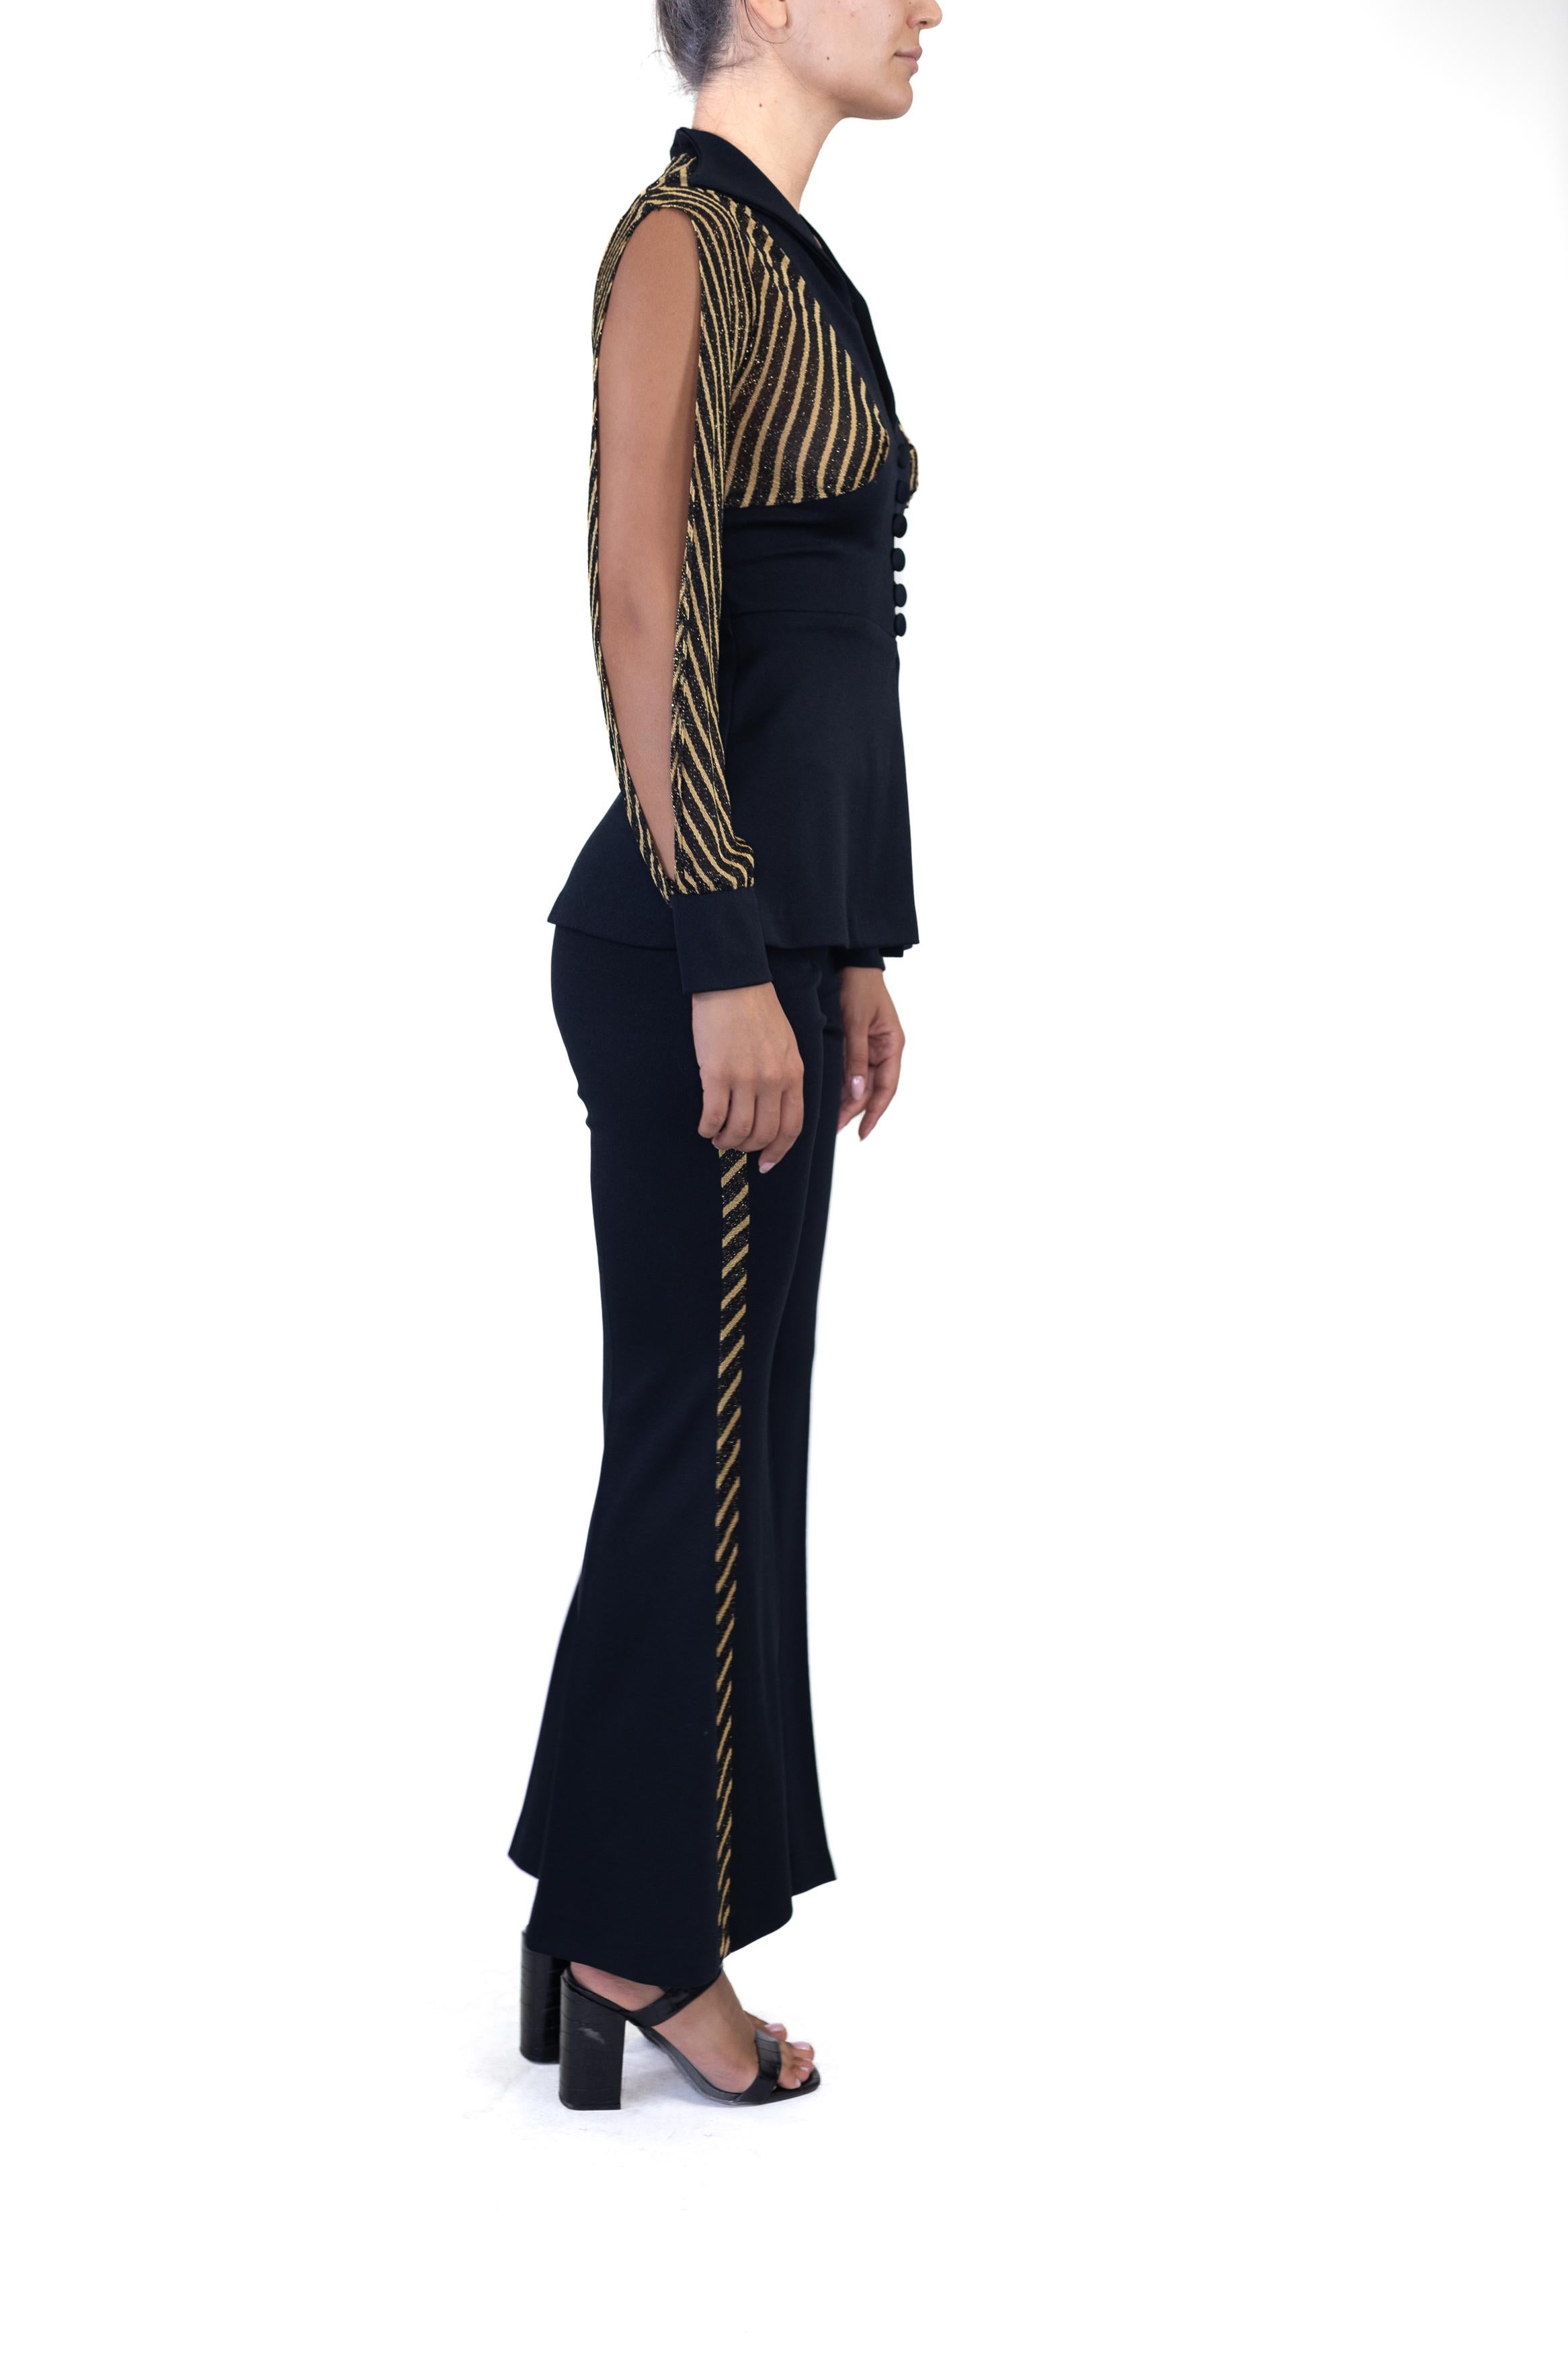 1970S HOLLYWOOD FREDERICKS Black & Gold Metallic Poly/Lurex Knit Stripe Disco P In Excellent Condition In New York, NY